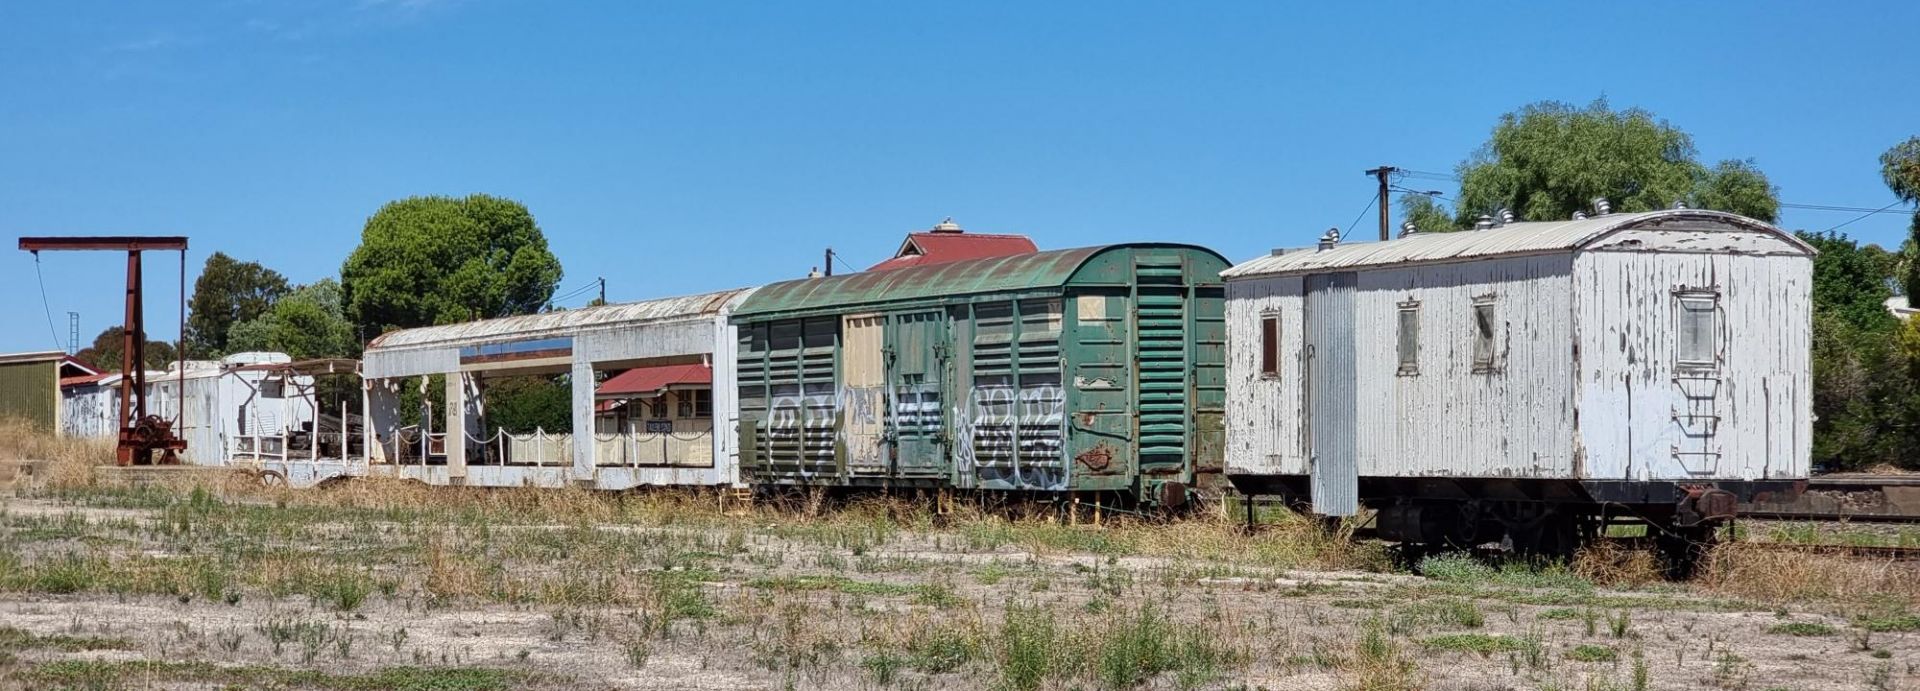 Tailem Bend Train Carriages - 3 March 2023 